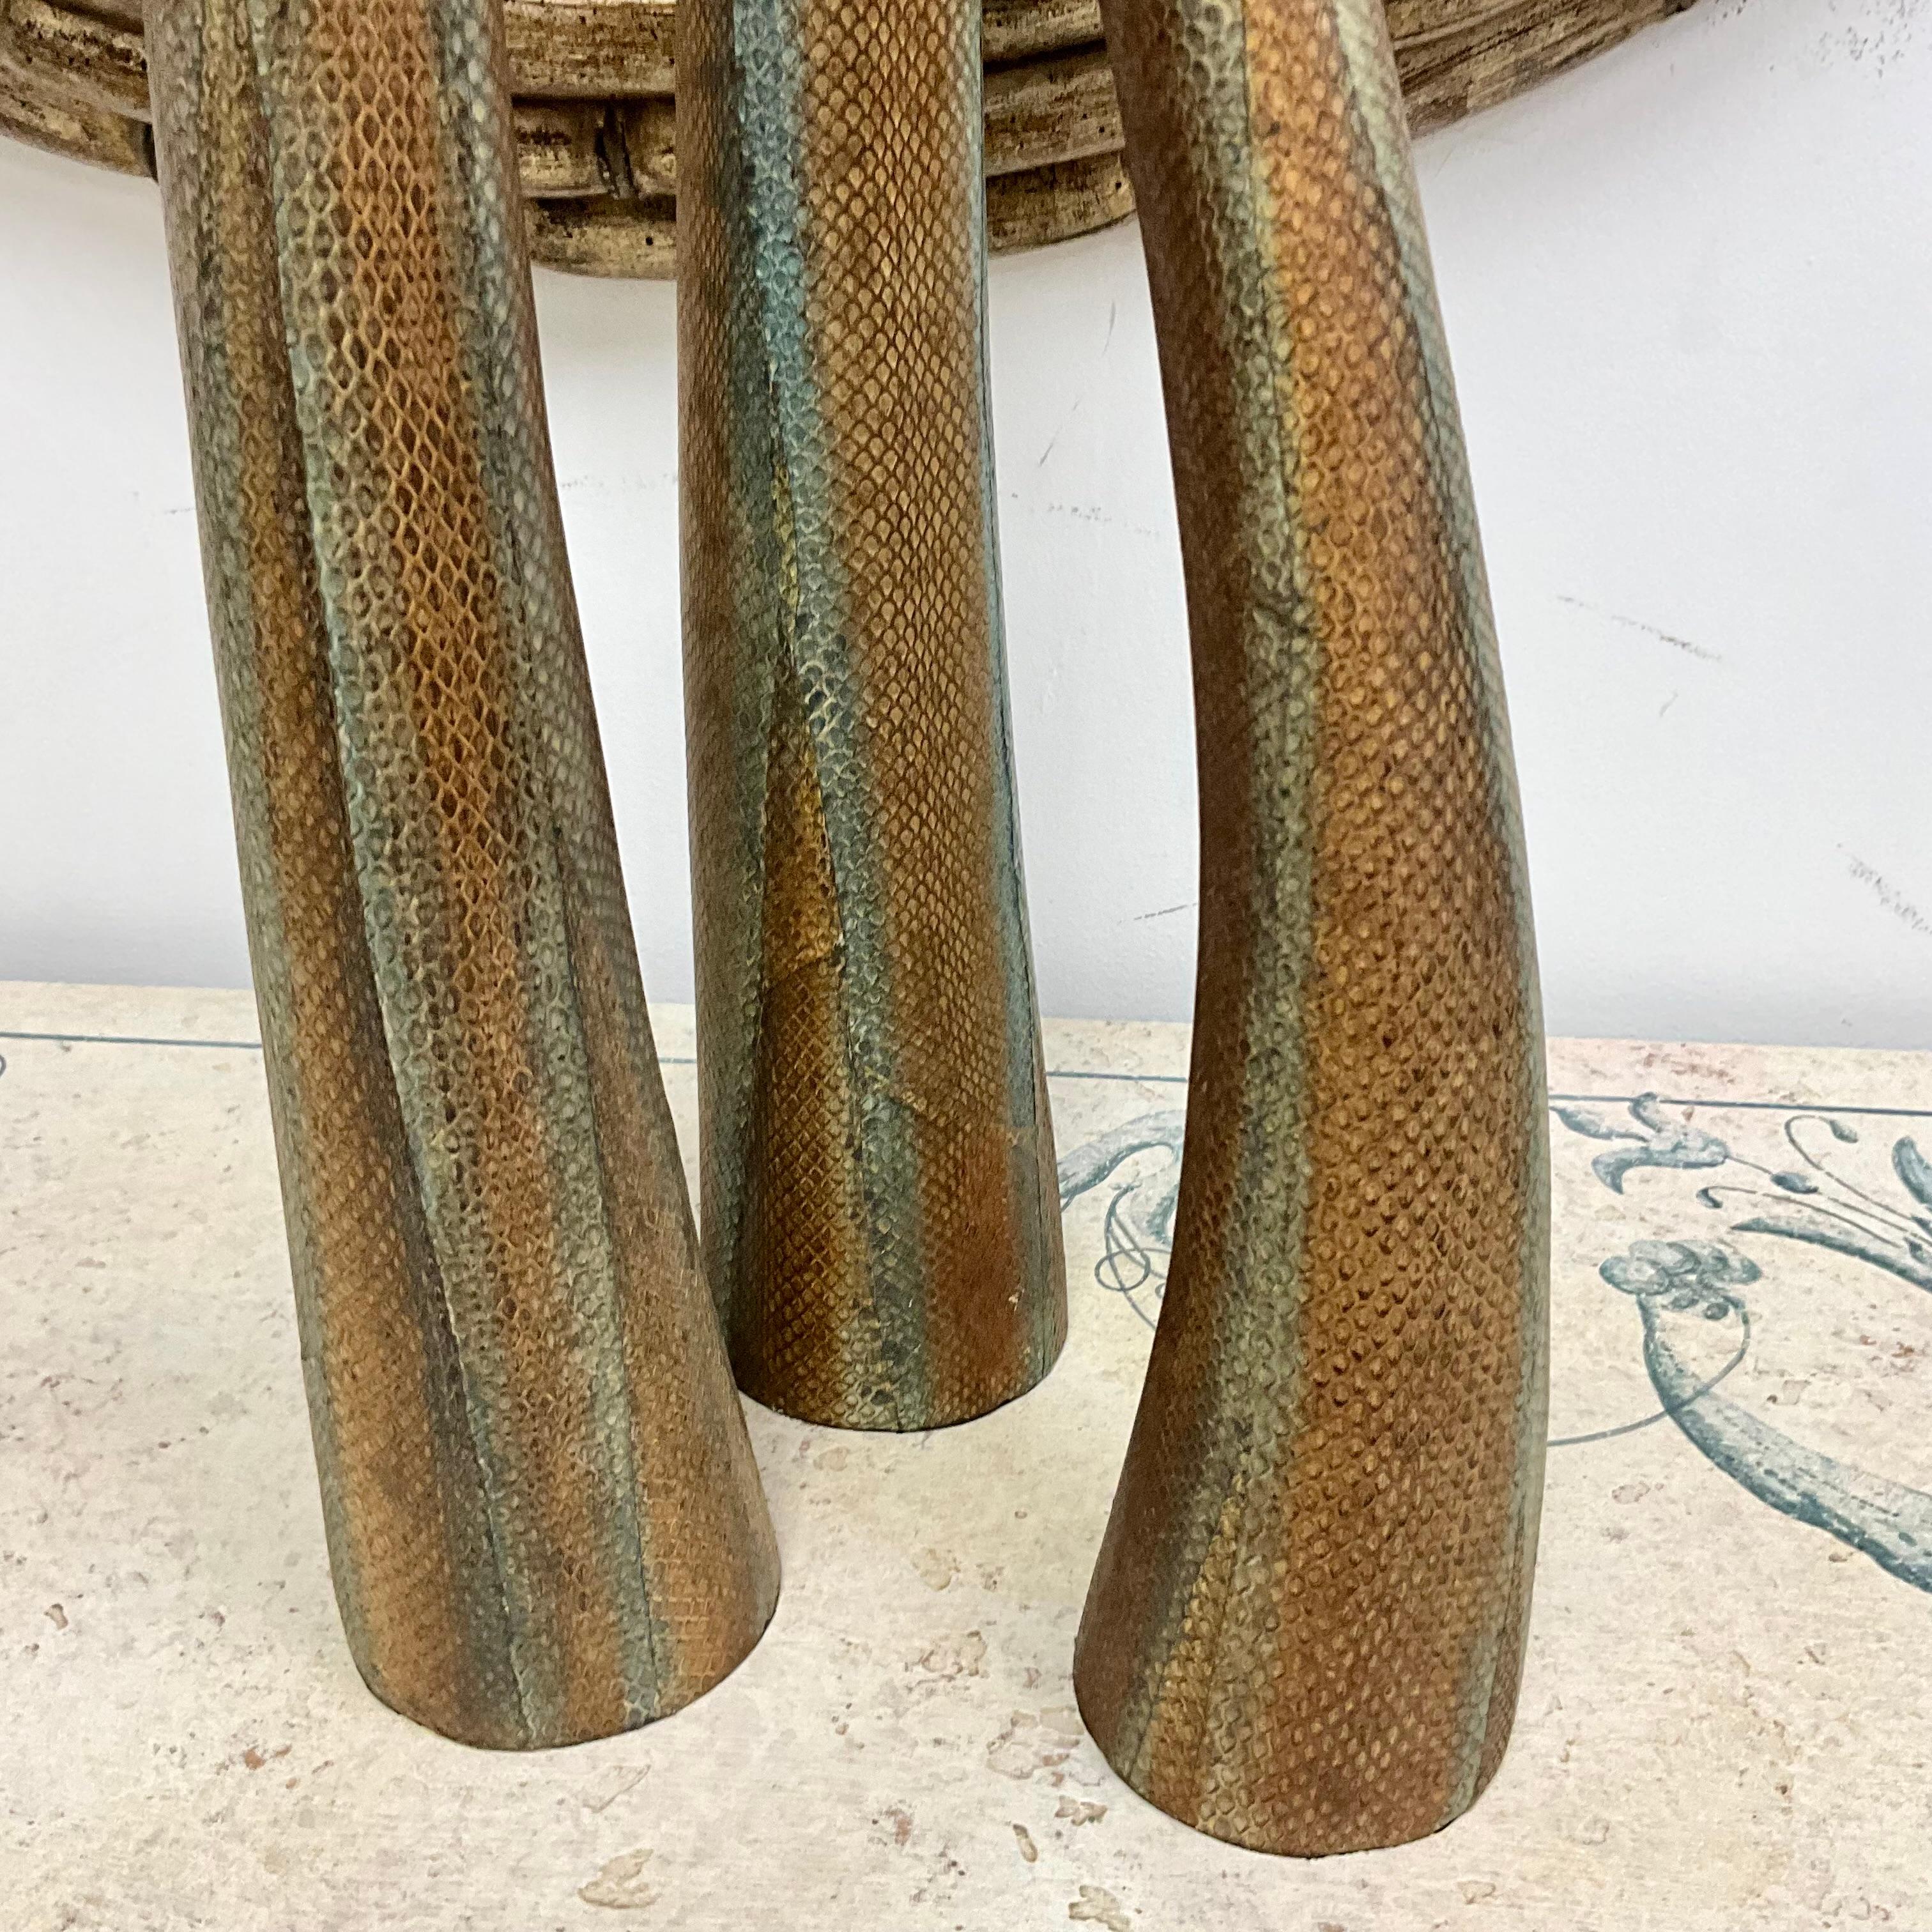 Set of three vases covered in hand painted snakeskin in graduating heights ranging from 29.5” x 28’ x 18.5”.  All three vessels have a diameter of 4”.  The vases have been artist hand painted in varying earthtone organic colors of browns and light